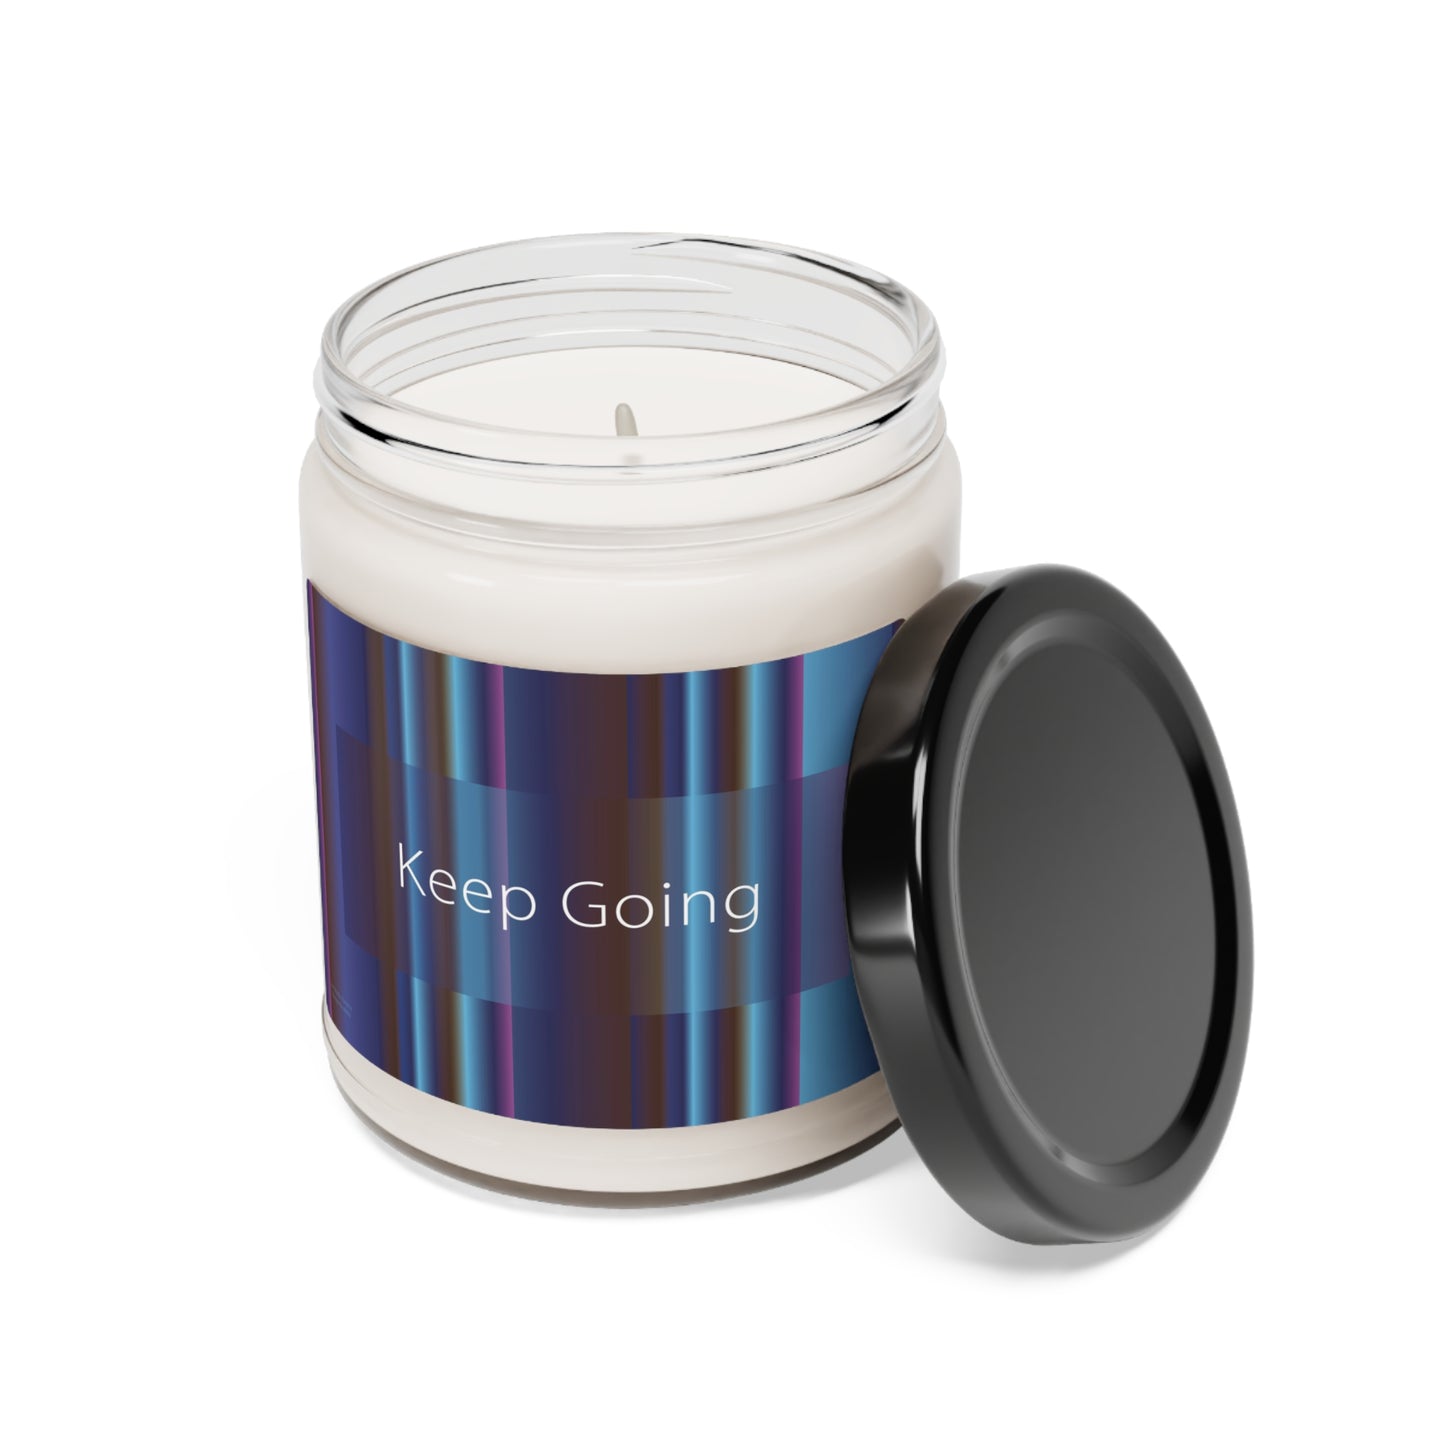 Scented Soy Candle, 9oz Keep Going - Design No.8000